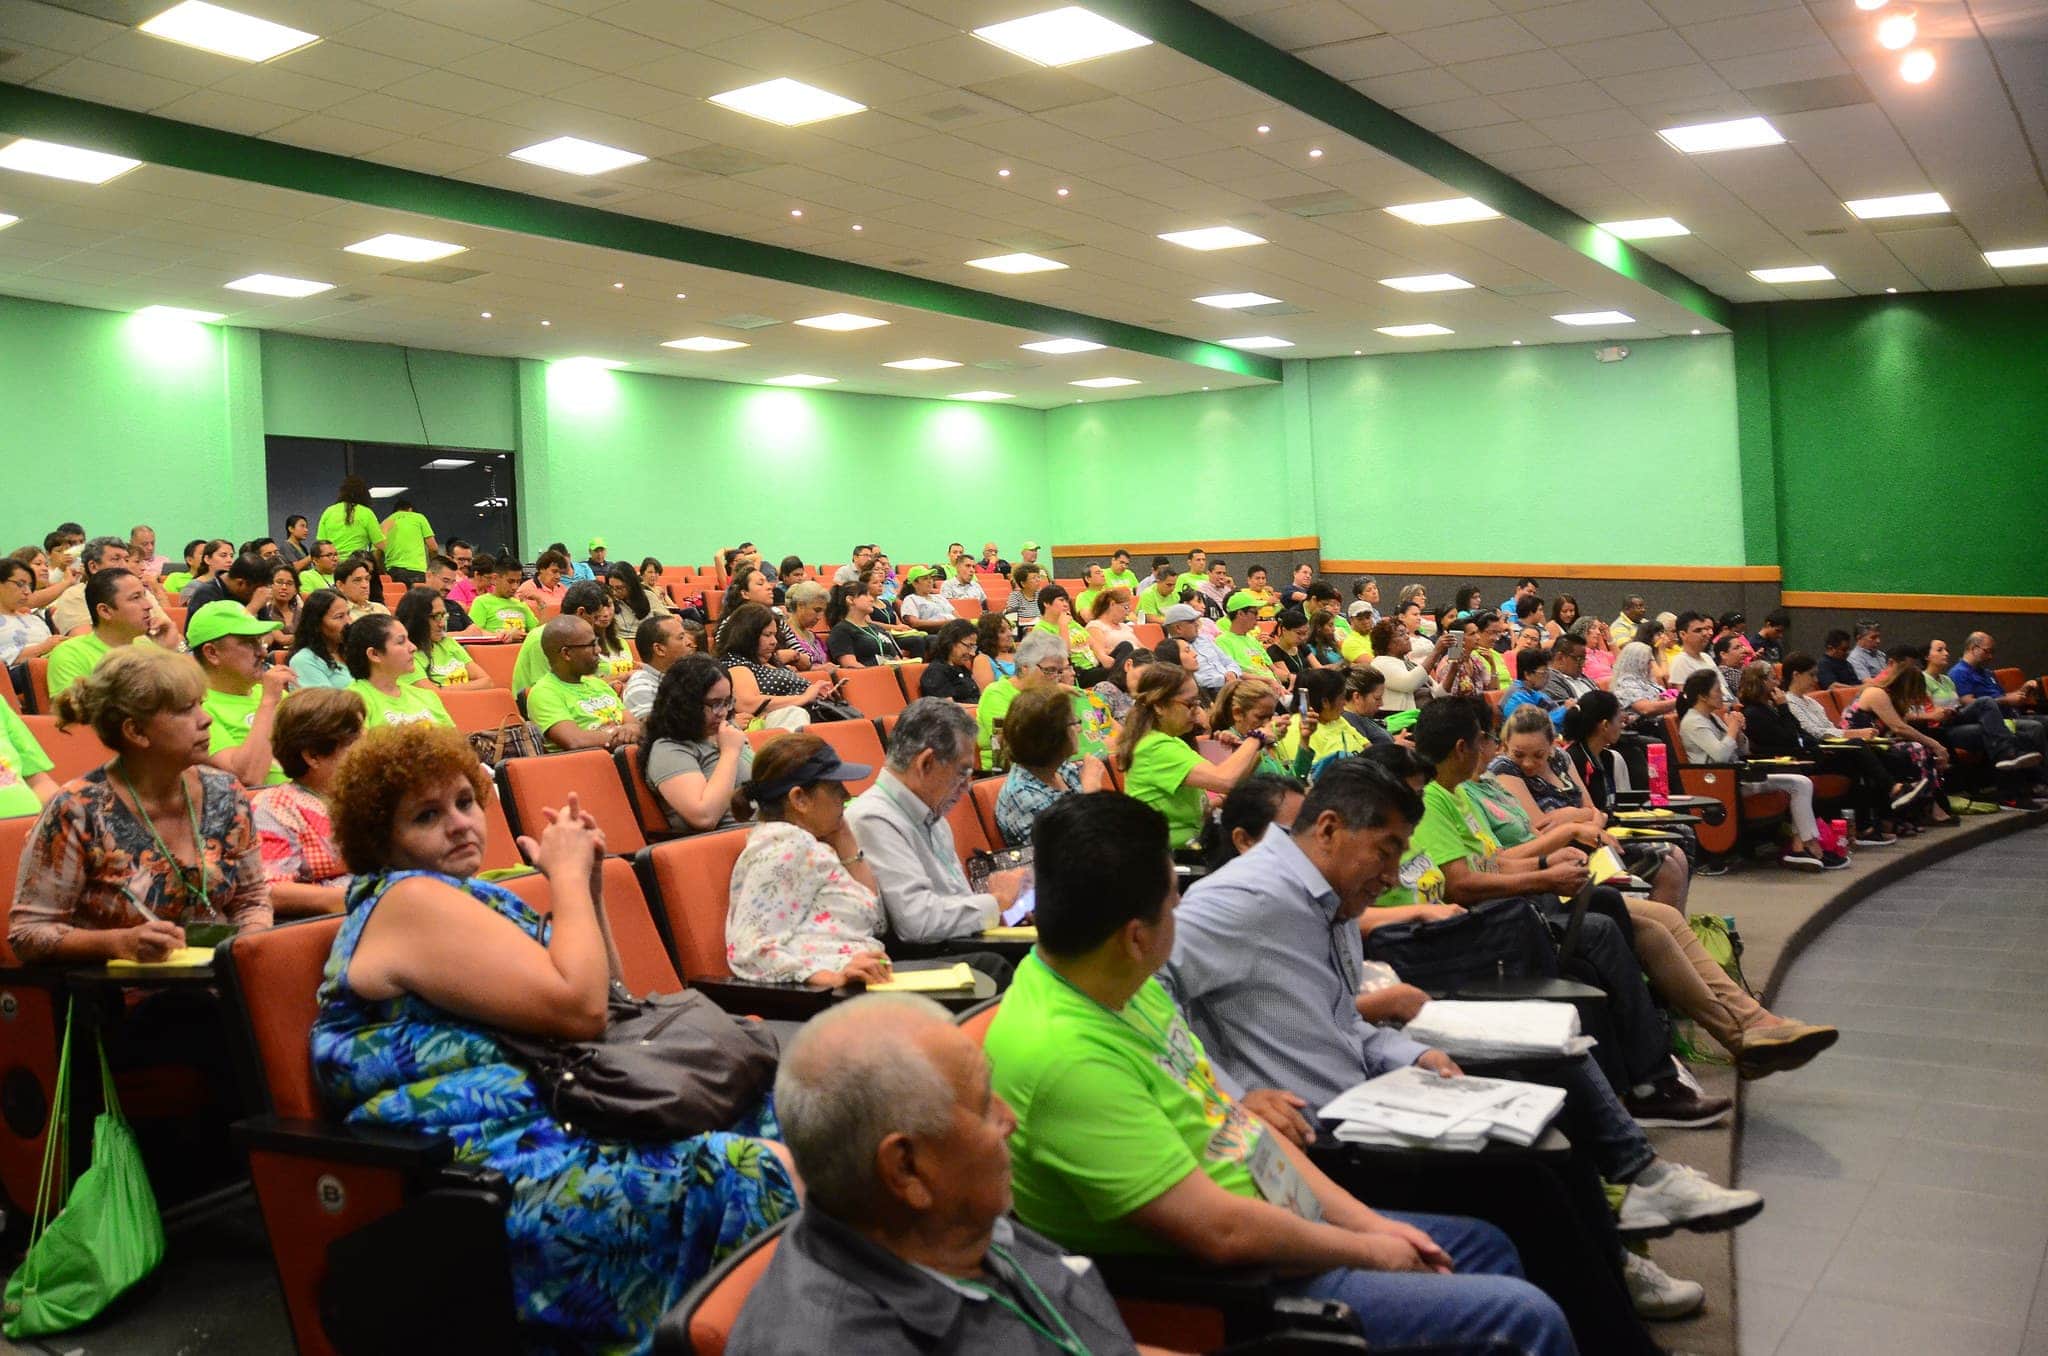 Health enthusiasts and promoters from across the Inter-American Division territory during the annual “I Want to Live Healthy” training session at Montemorelos University, in North Mexico. [Photo: Montemorelos University]